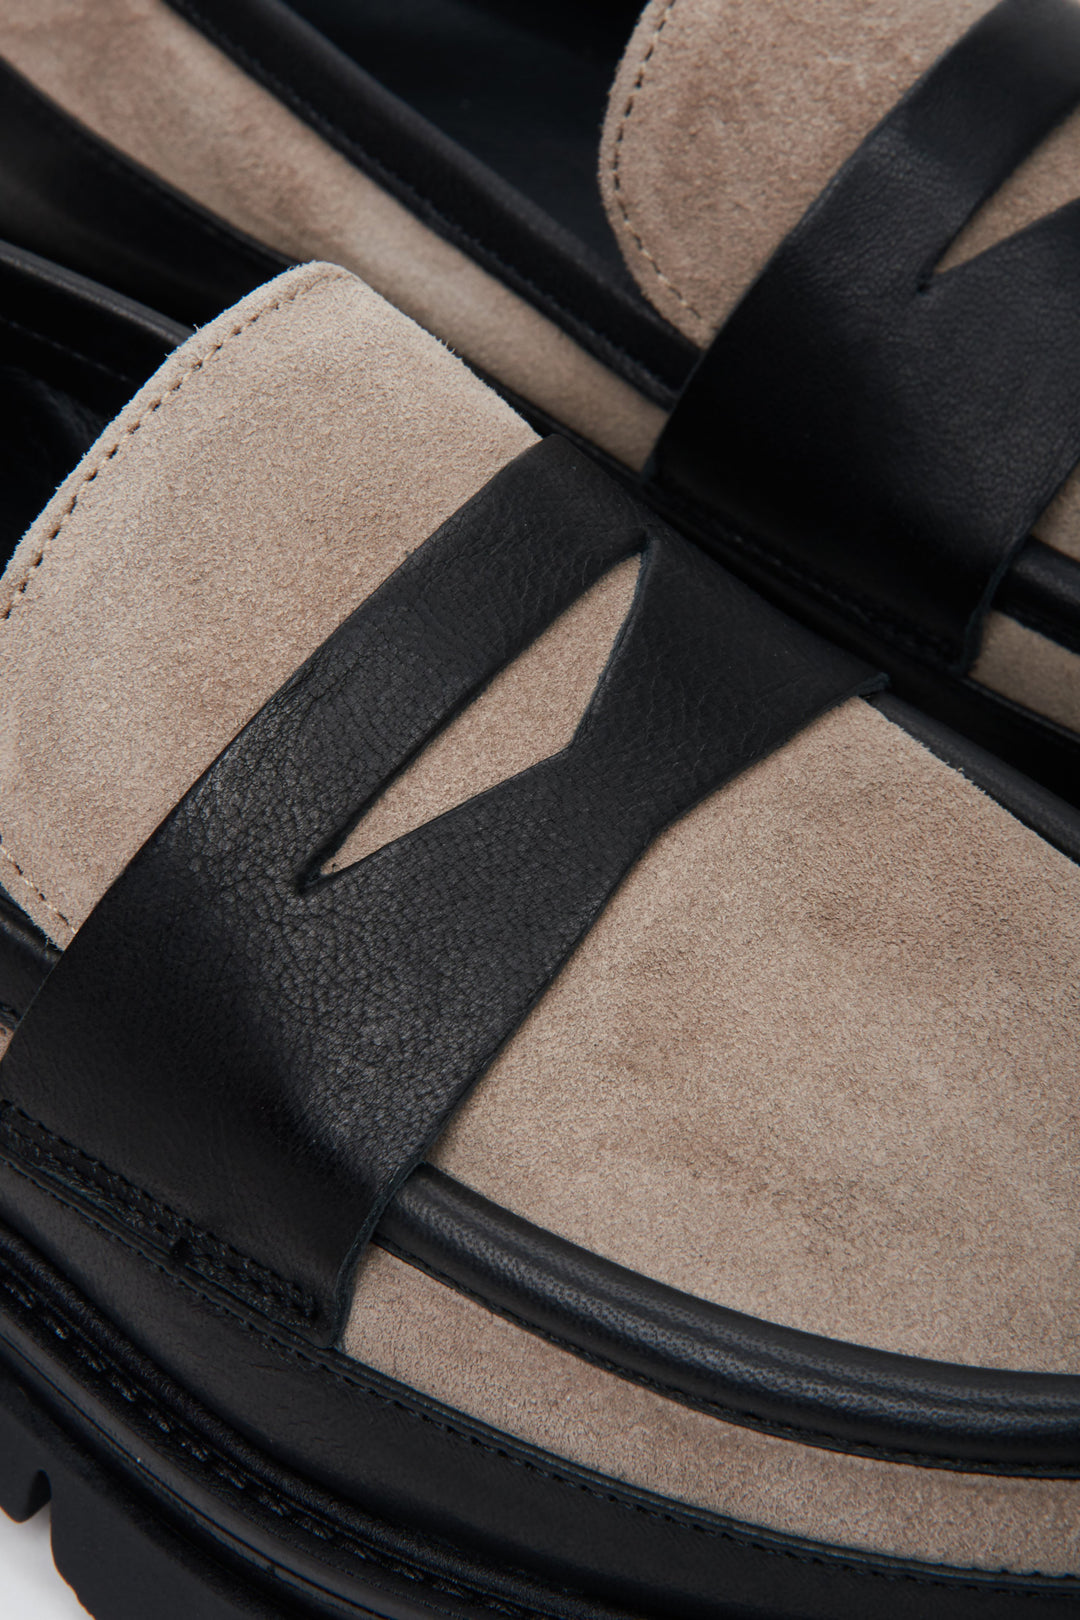 Women's slip-on penny loafers in black-and-beige - close-up on the details.